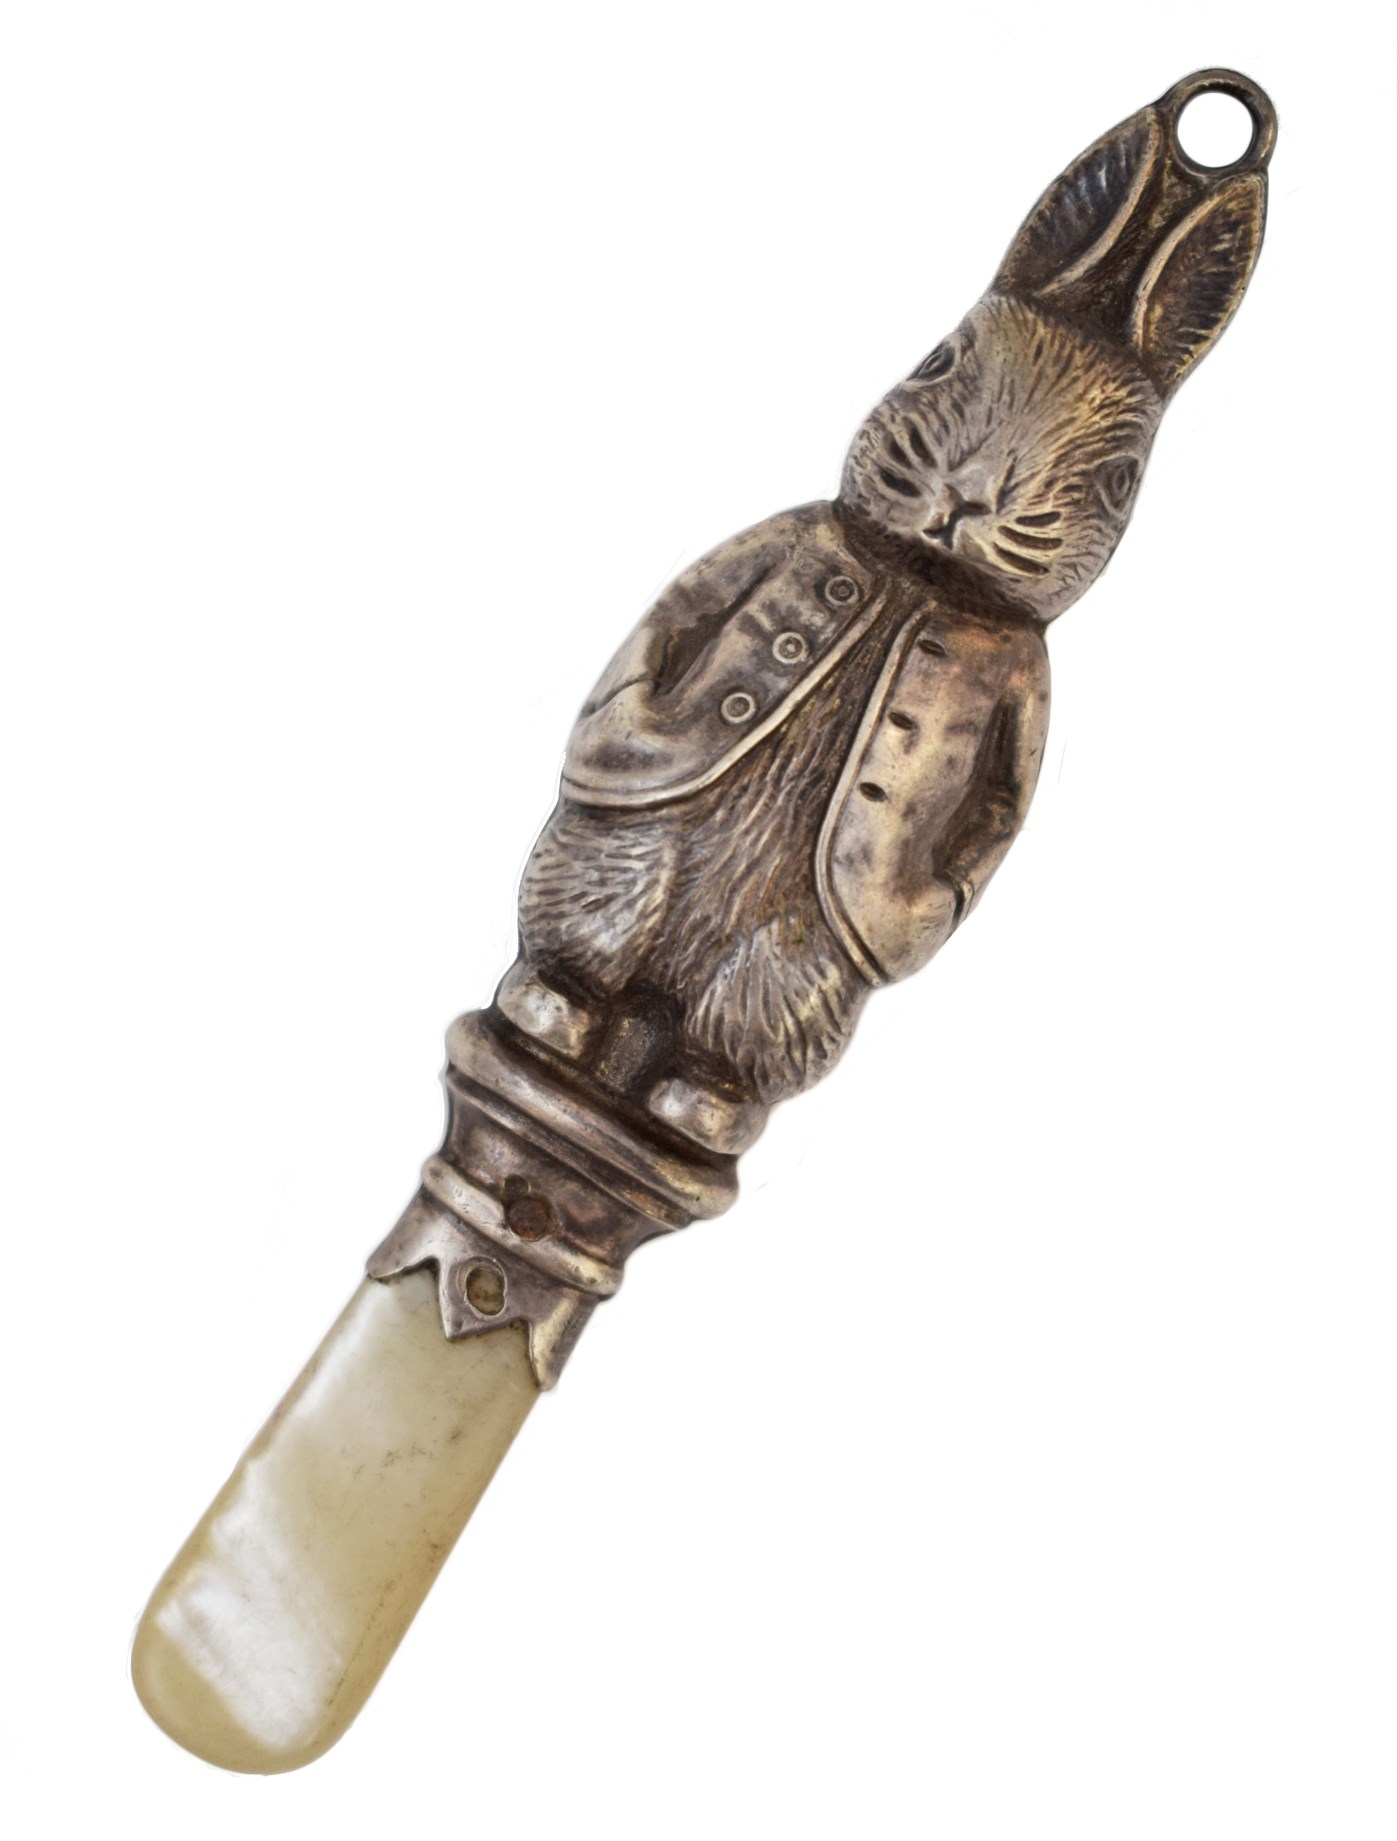 Silver baby rattle in the form of Peter Rabbit , hollow carved body with loop fitting to ears on